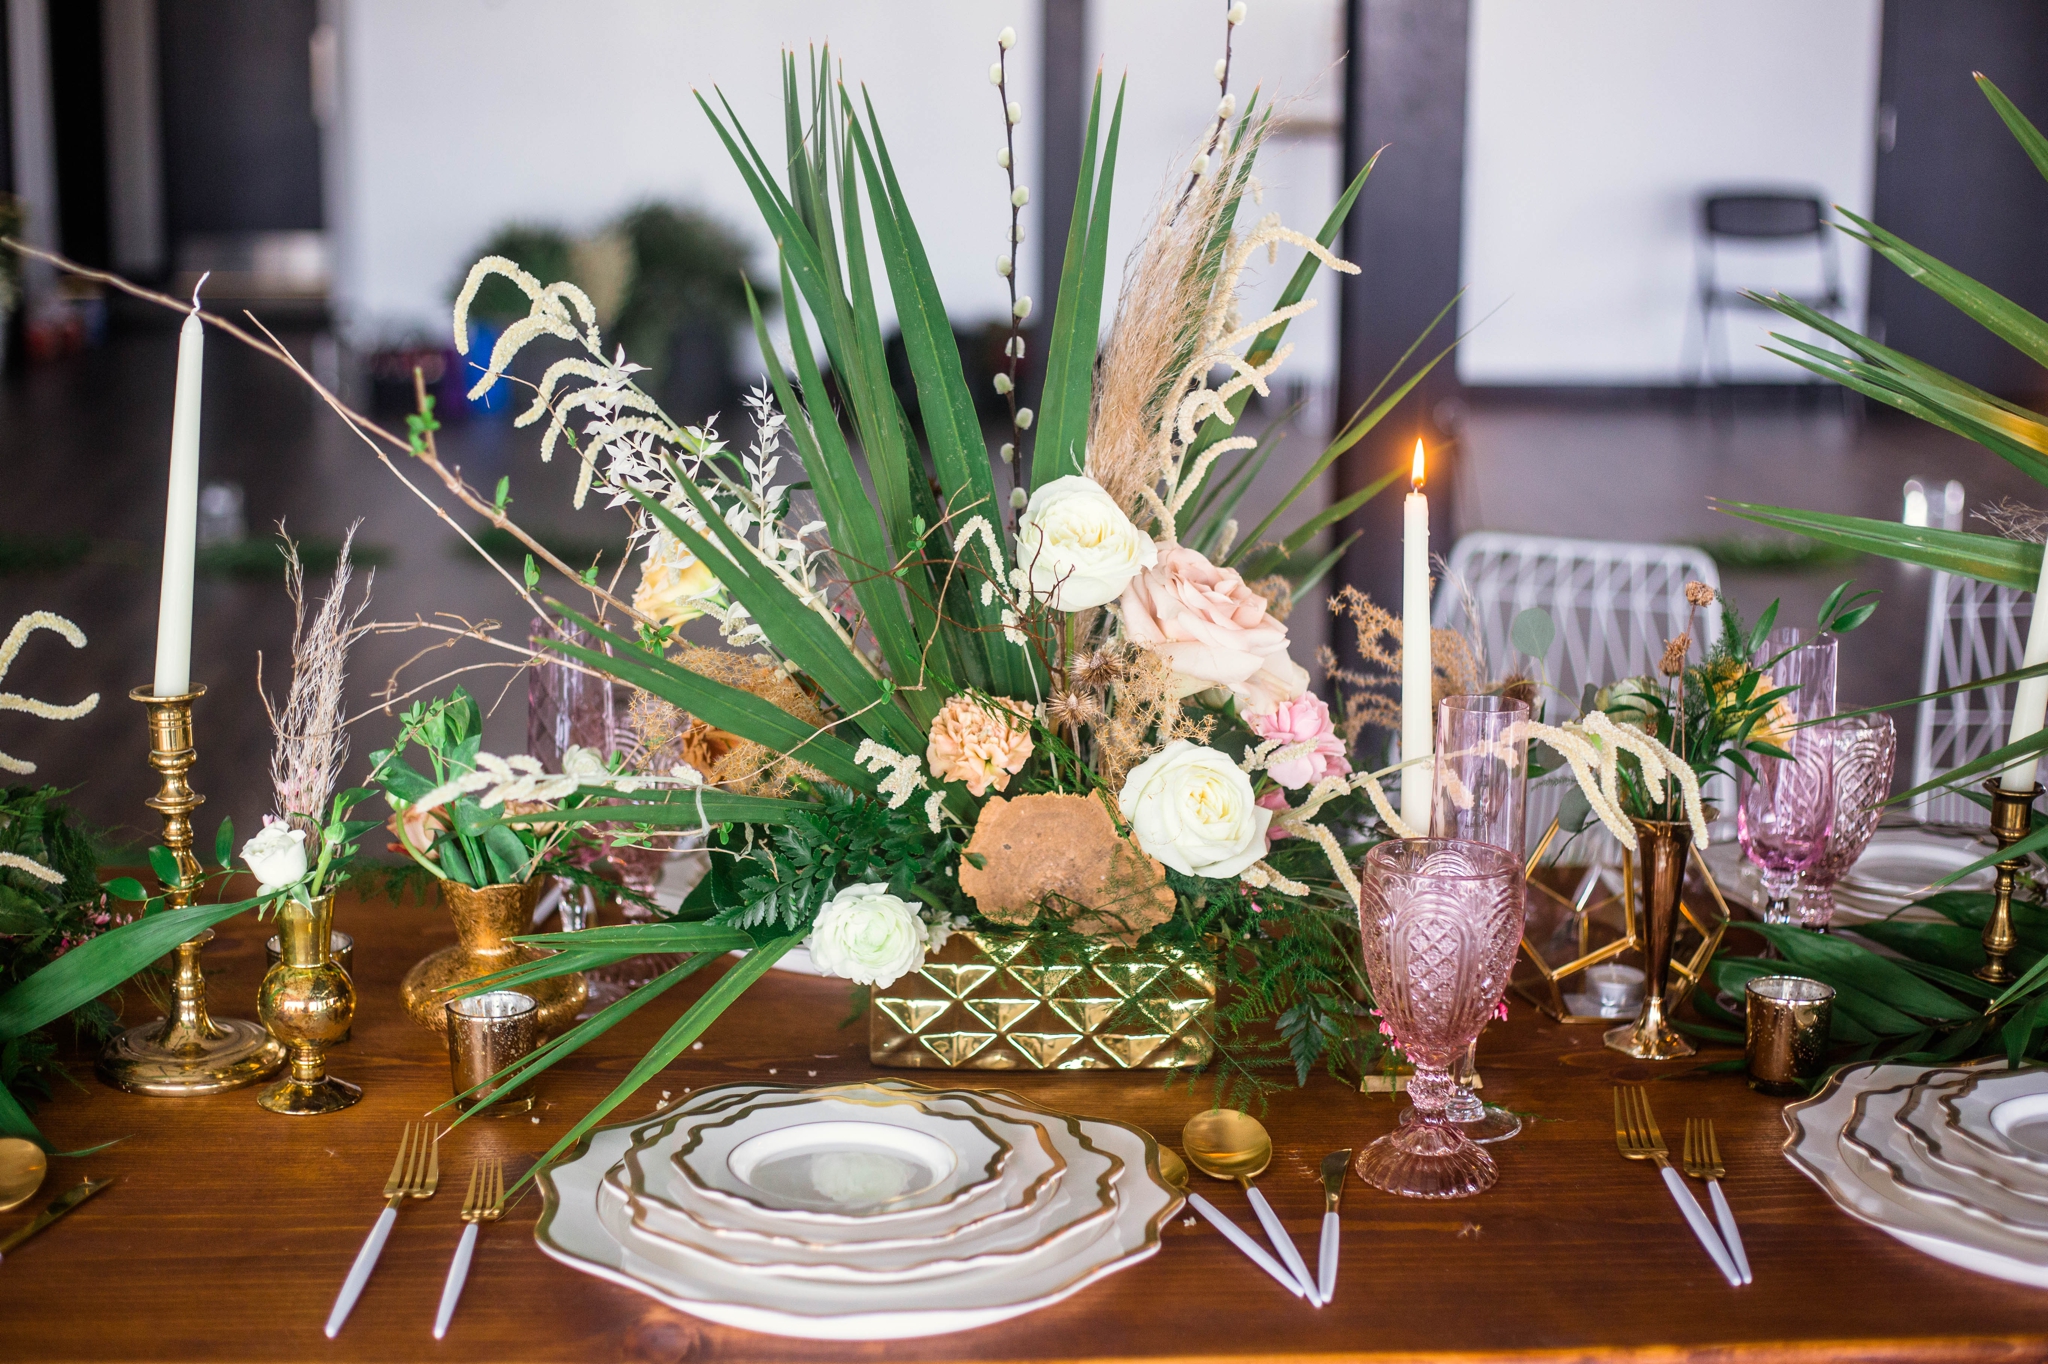  Wedding Table Setting with white and gold plates, pink glass wear, gold and white silverware - colorful flowers and tropical center piece - Destination Wedding Inspiration - Honolulu, Oahu, Hawaii Photographer 